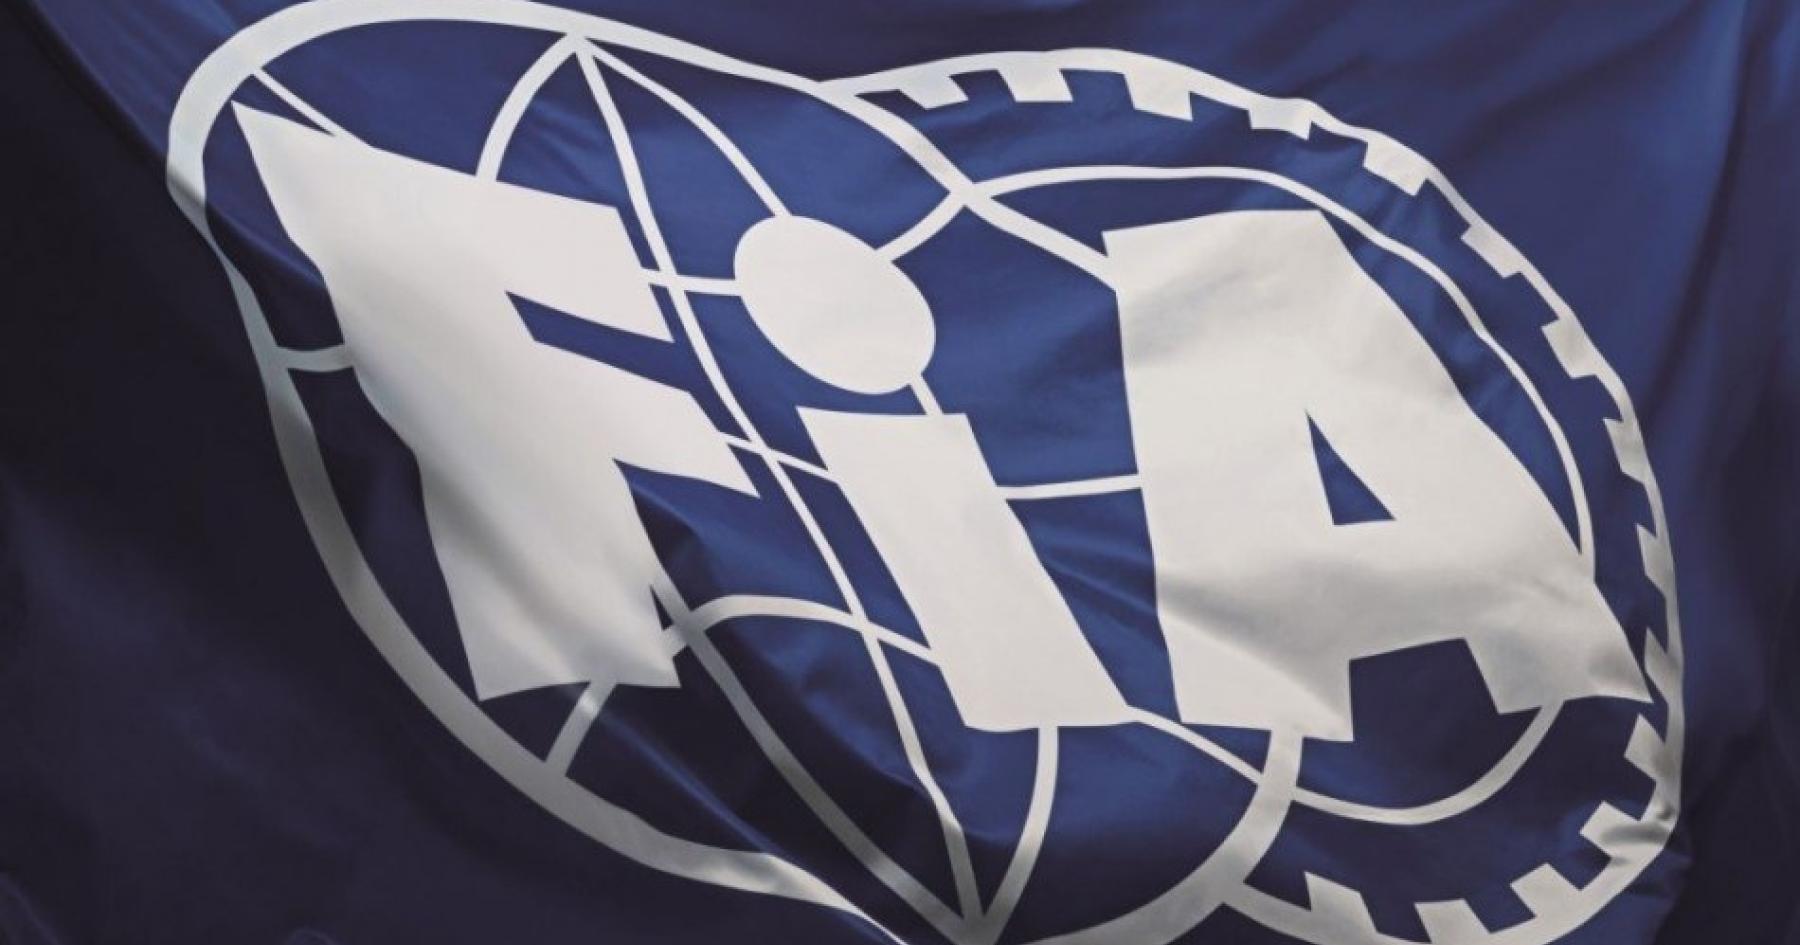 Dynamic Shift in Leadership: FIA CEO Steps Down after 18 Months